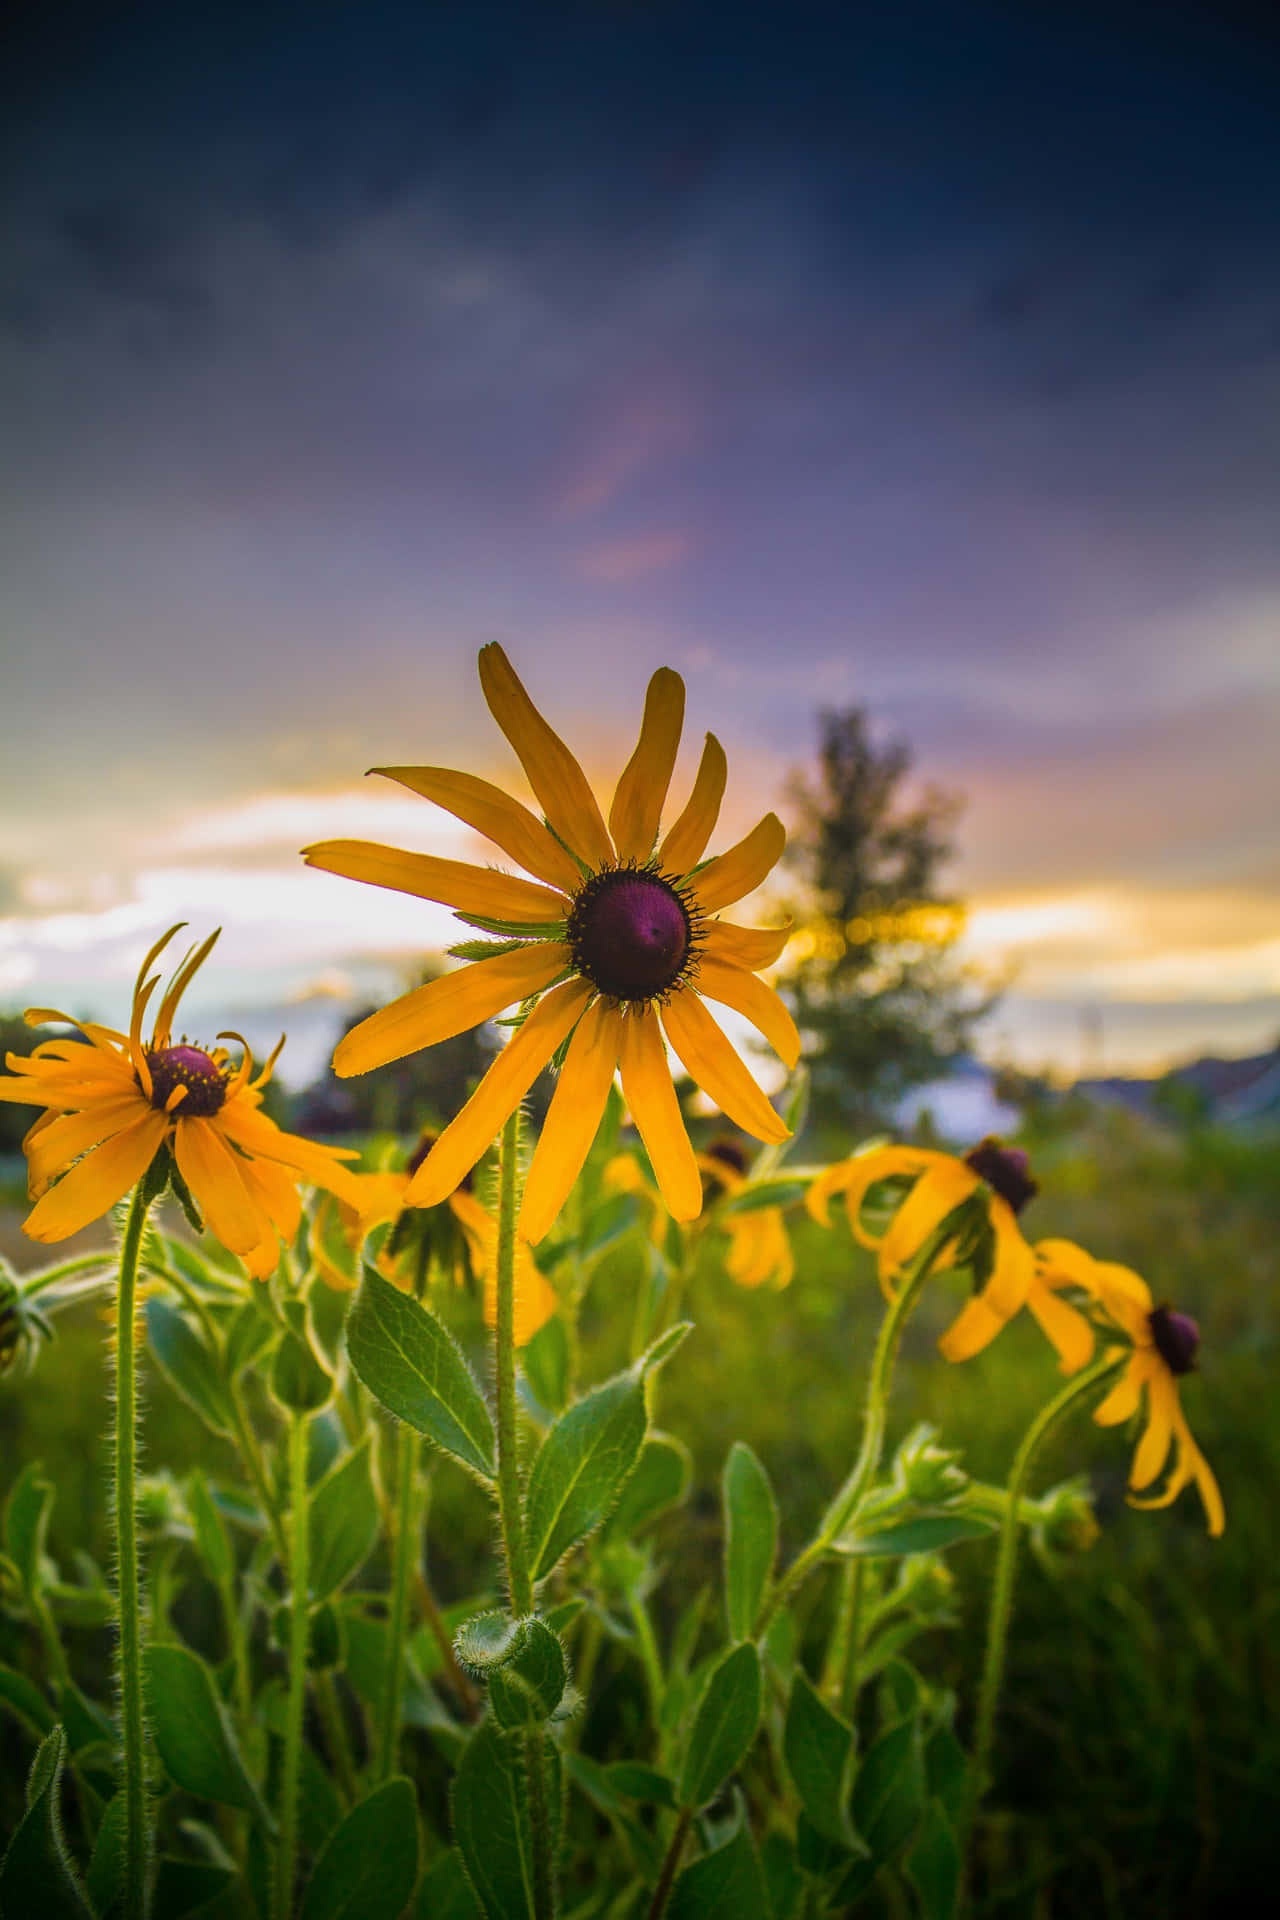 Black Eyed Susan  The vibrant hues of yellow and petals of Black-Eyed Susan come together in a stunning display of color. Wallpaper